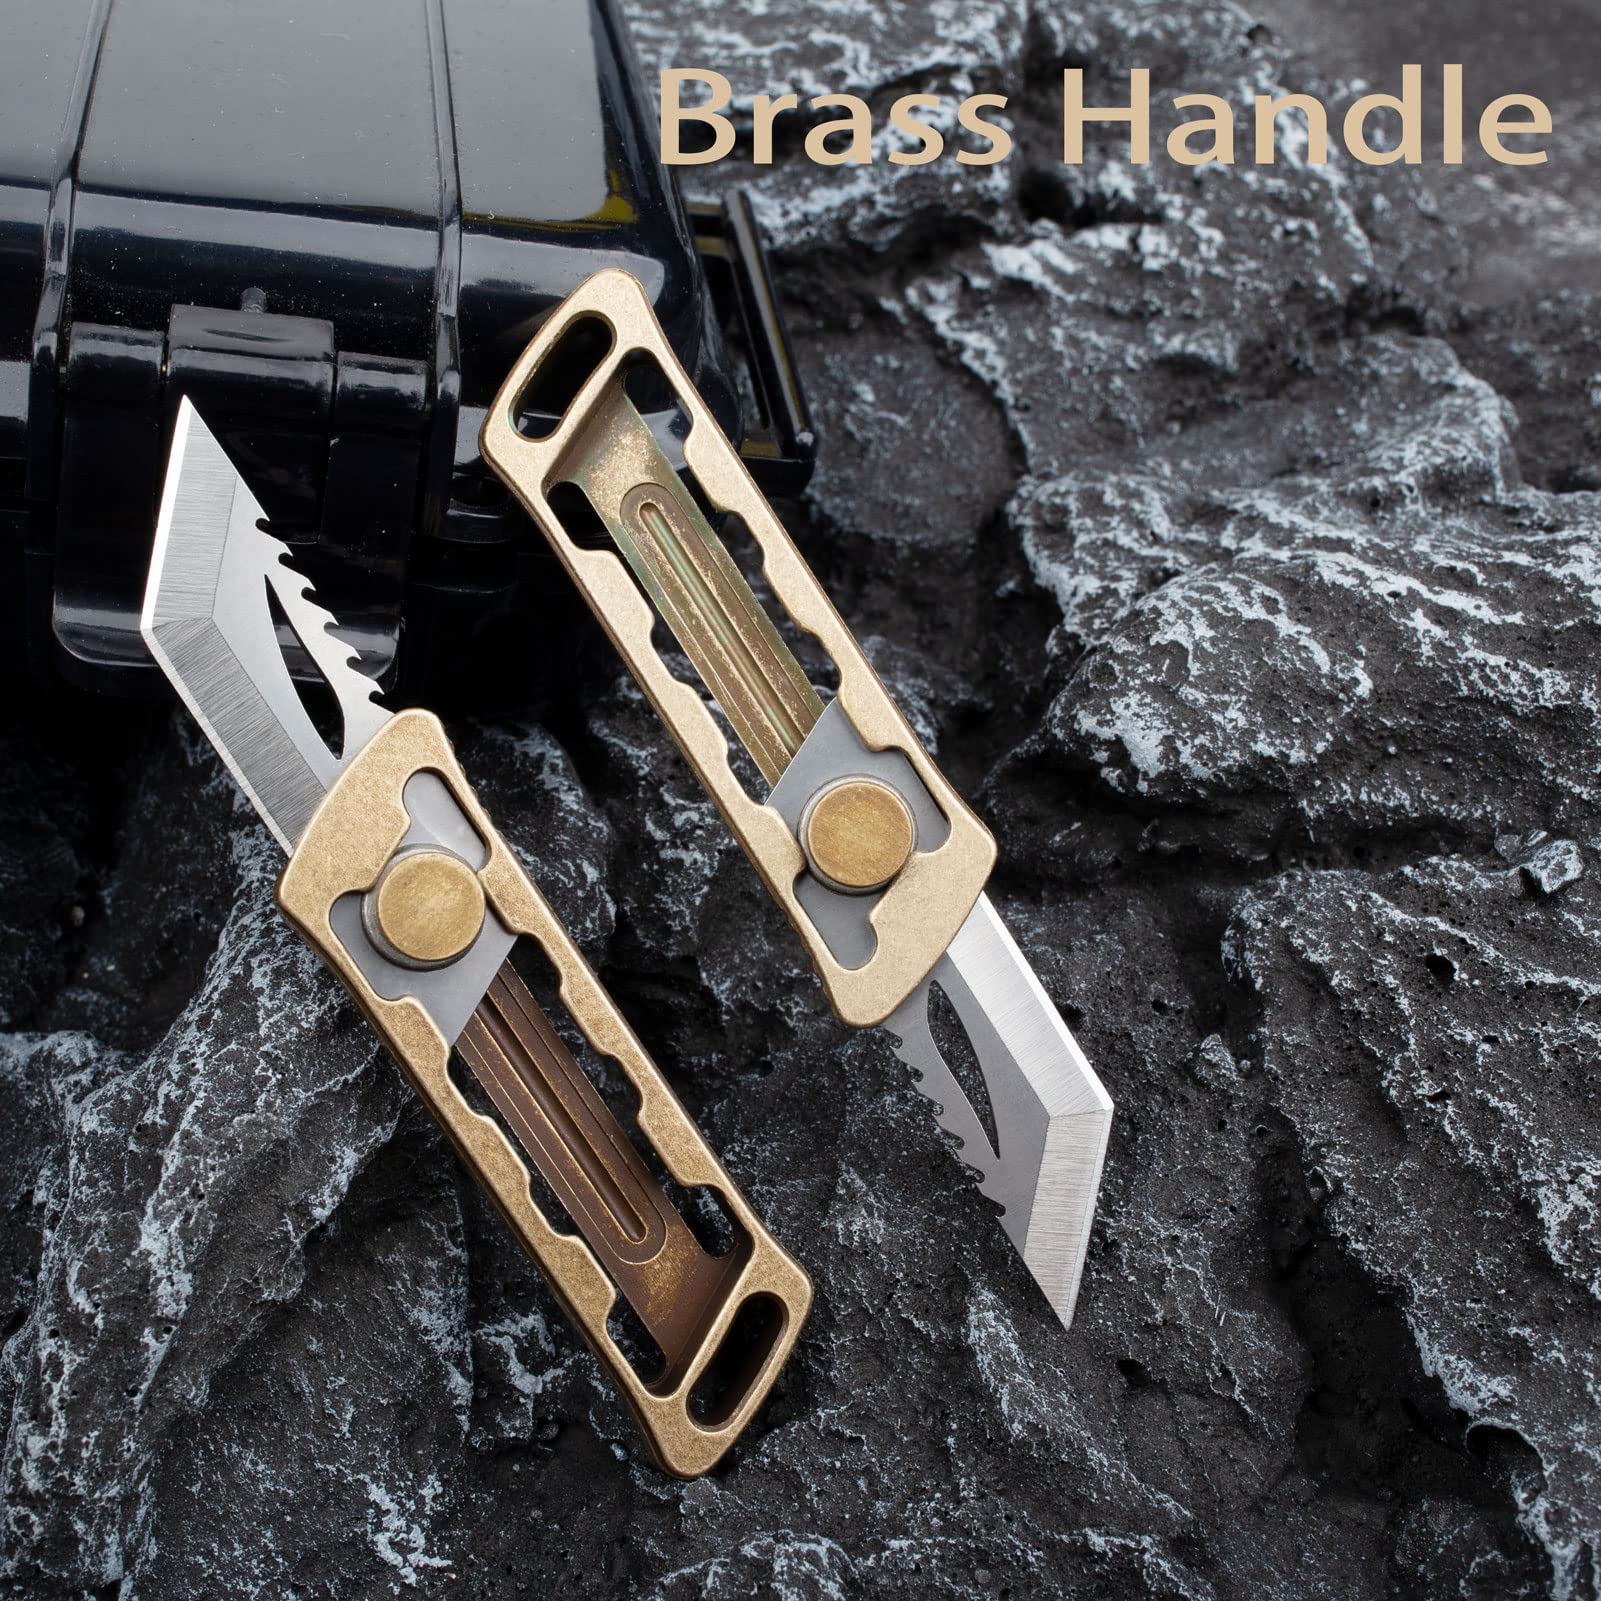 TENCHILON TK26 Mini Retractable Utility Box Cutter Keychain Knife, 1.2 inches D2 Tanto Blades, 2.6 inches Tumbled Skeletonized Brass Handles, Small Pocket EDC Cutting Tool Knives